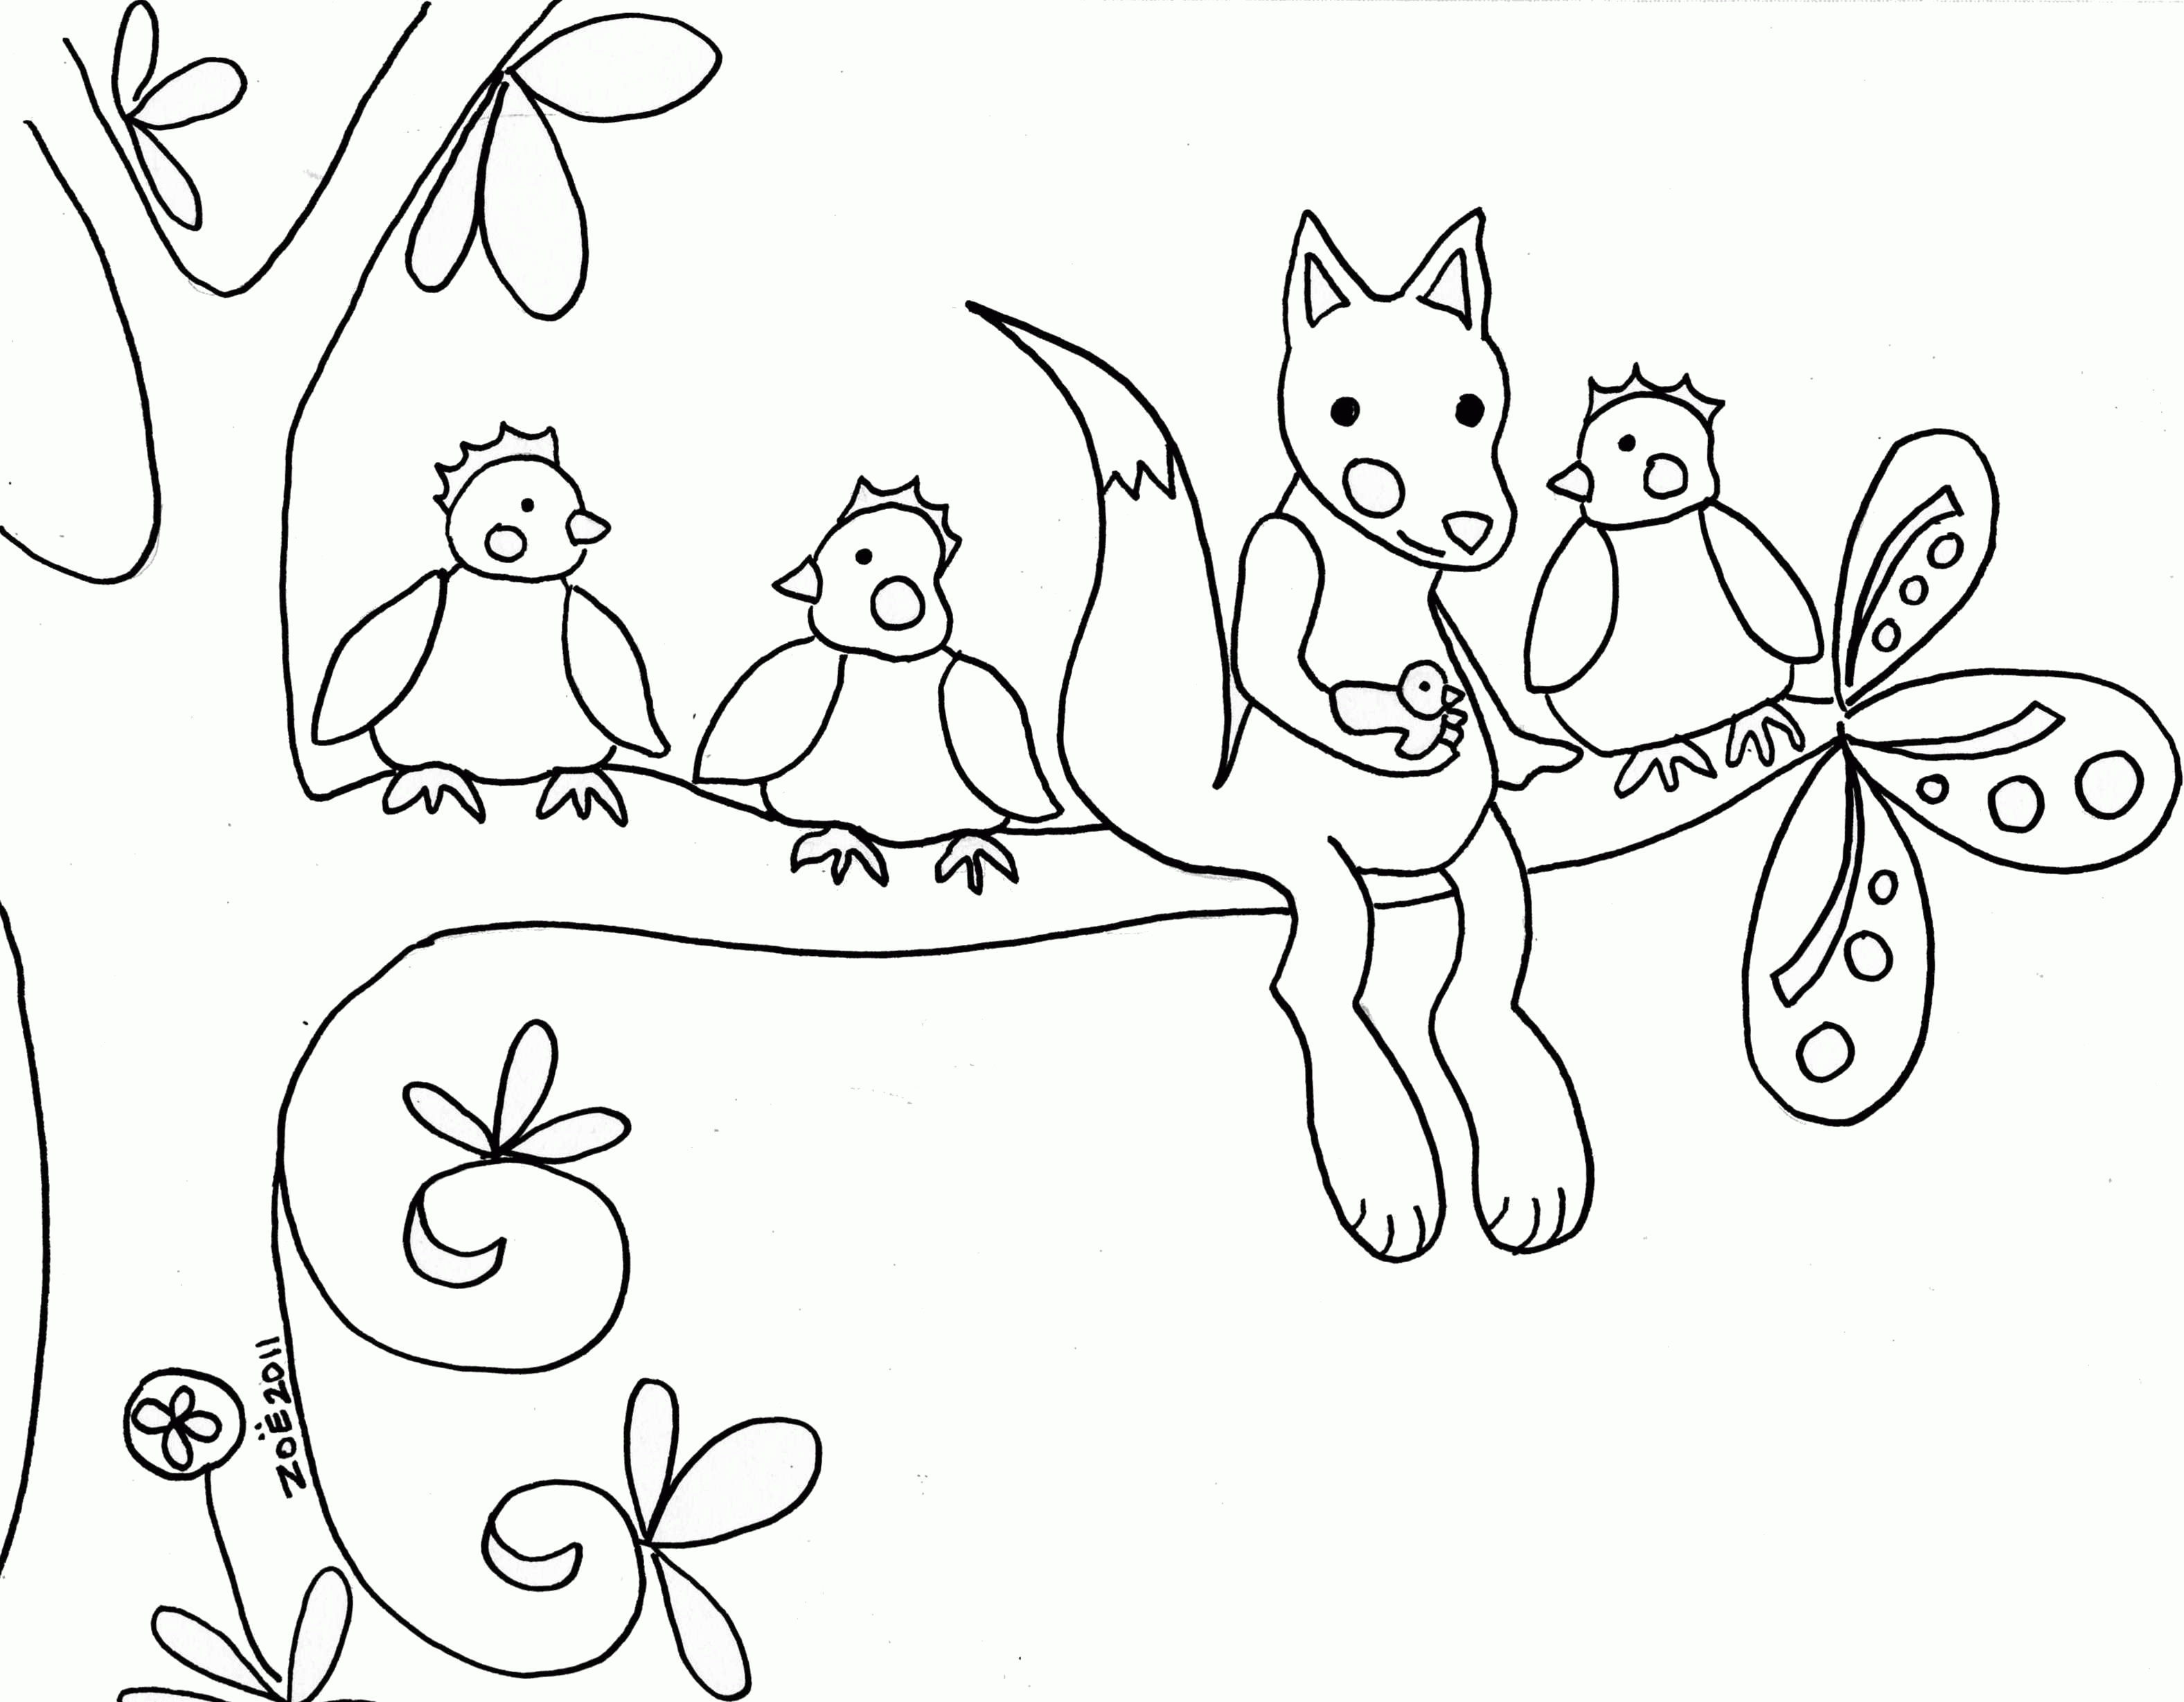 Download Woodland Animal Coloring Page - Coloring Home